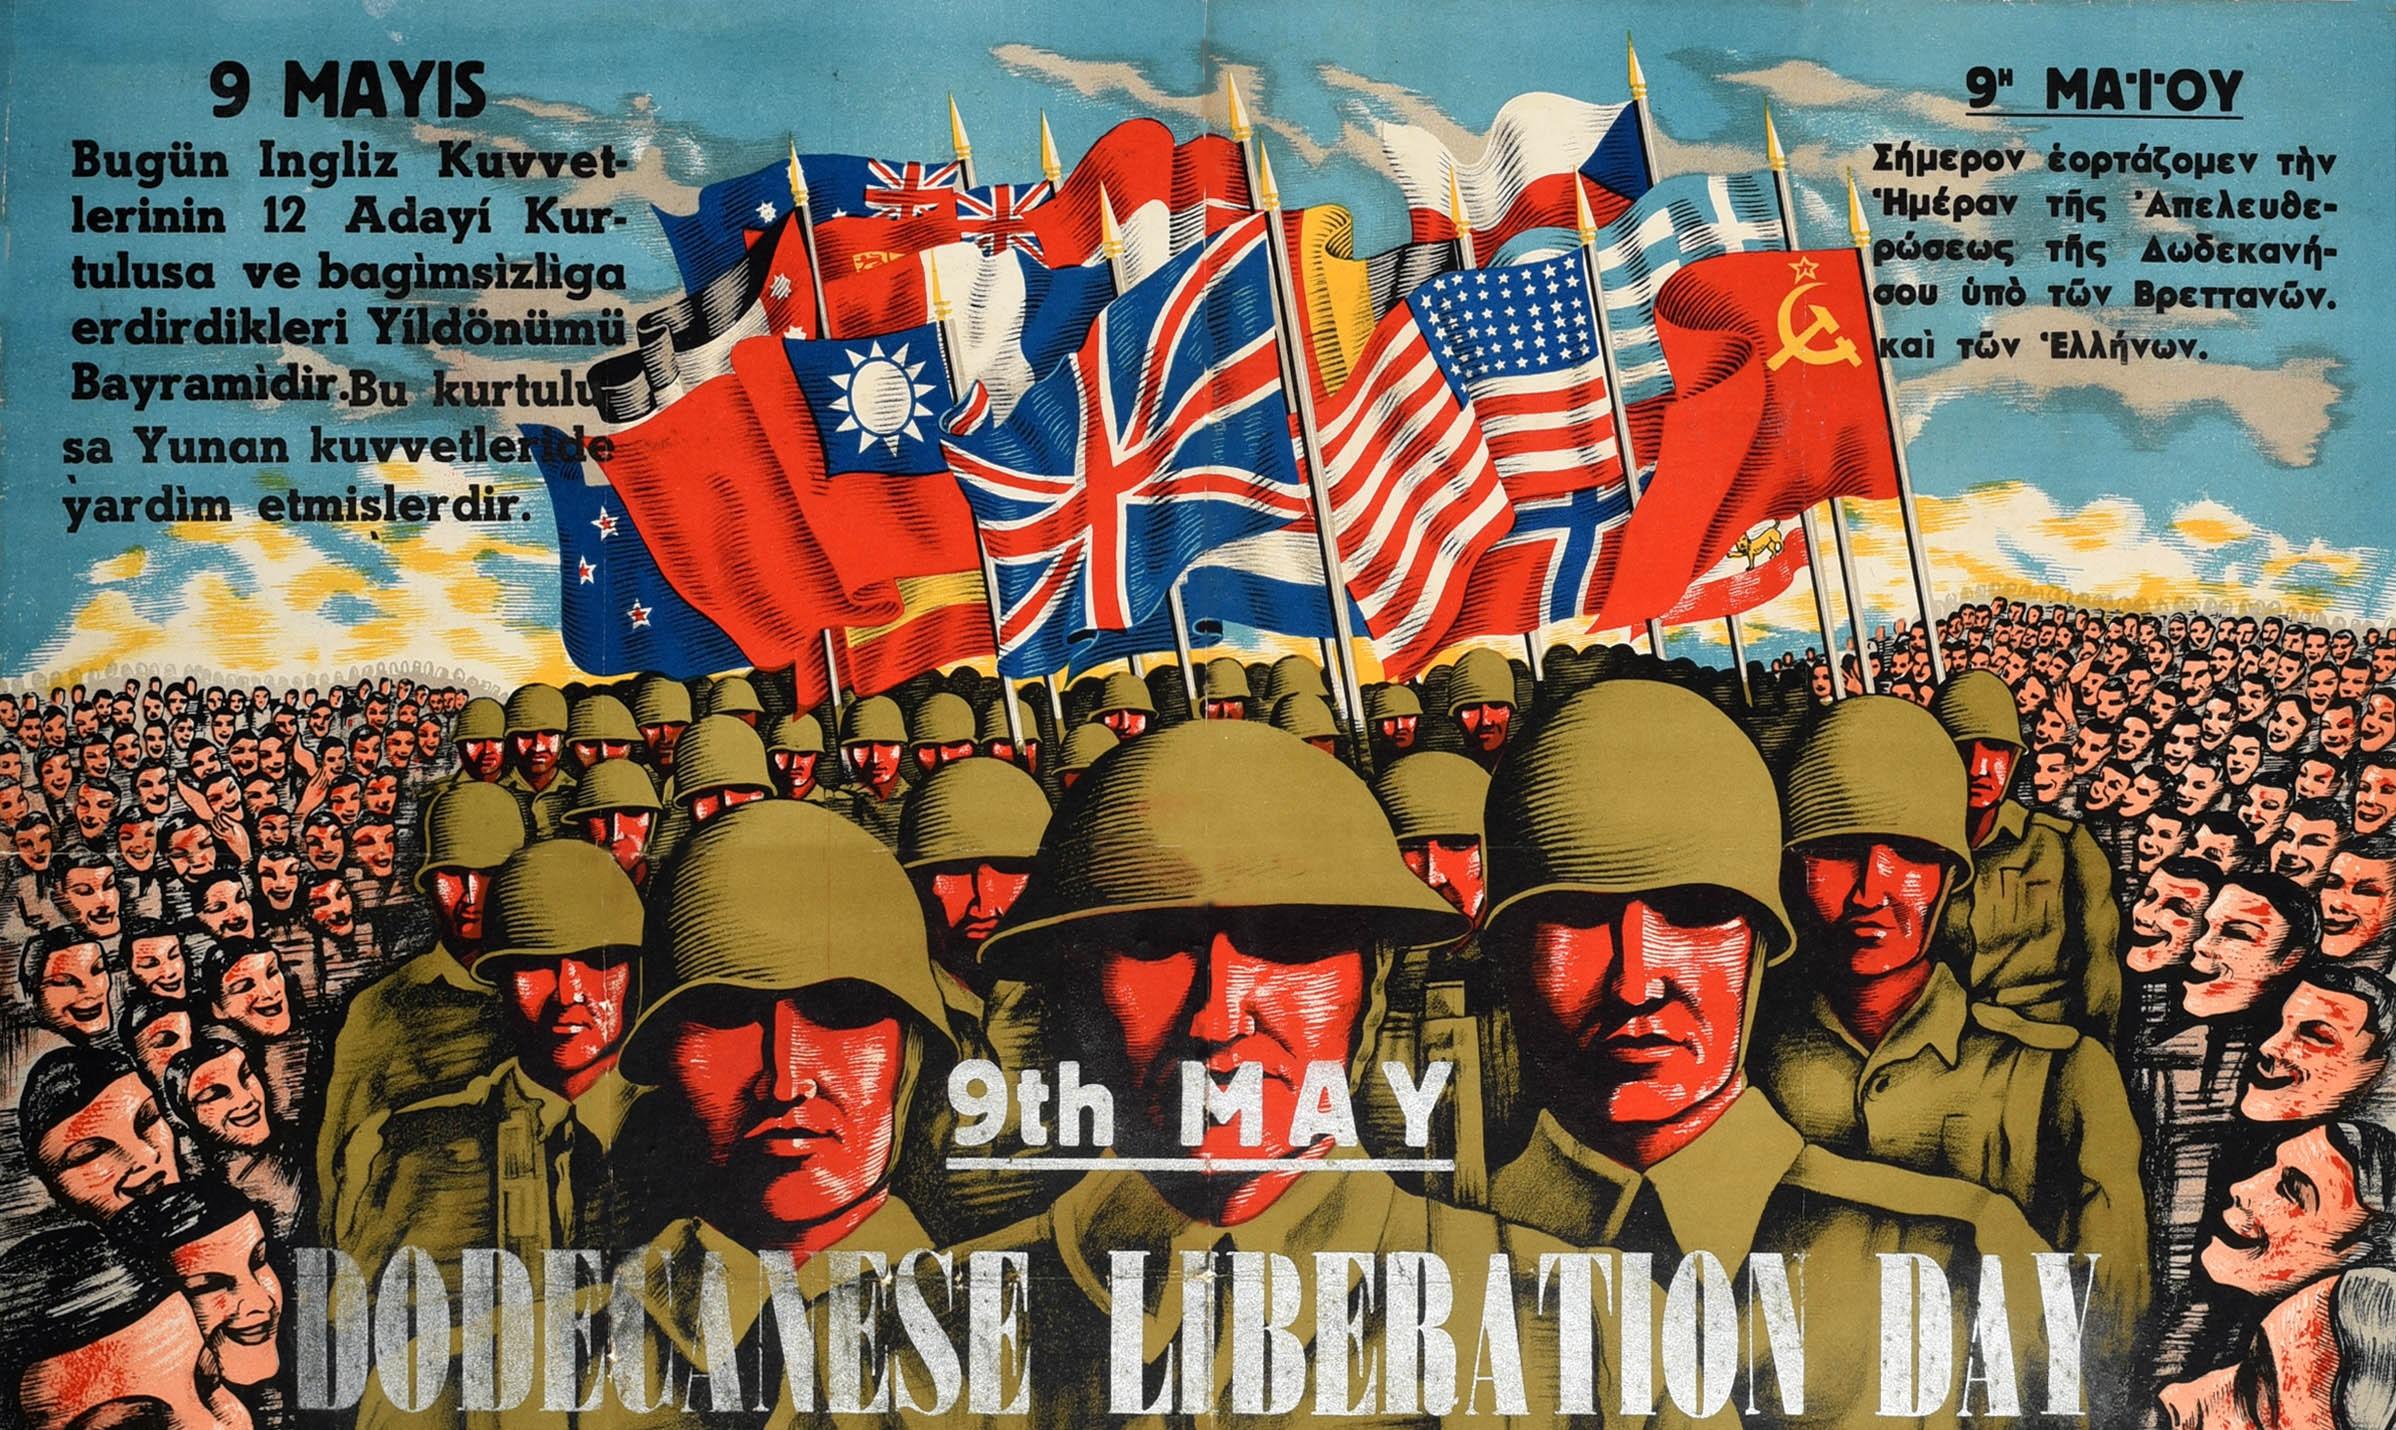 Original vintage post World War Two poster celebrating the first anniversary of the Allied liberation of the Dodecanese islands from the occupying Nazi German forces - Dodecanese Liberation Day 9 May 1946 - featuring crowds of happy people smiling